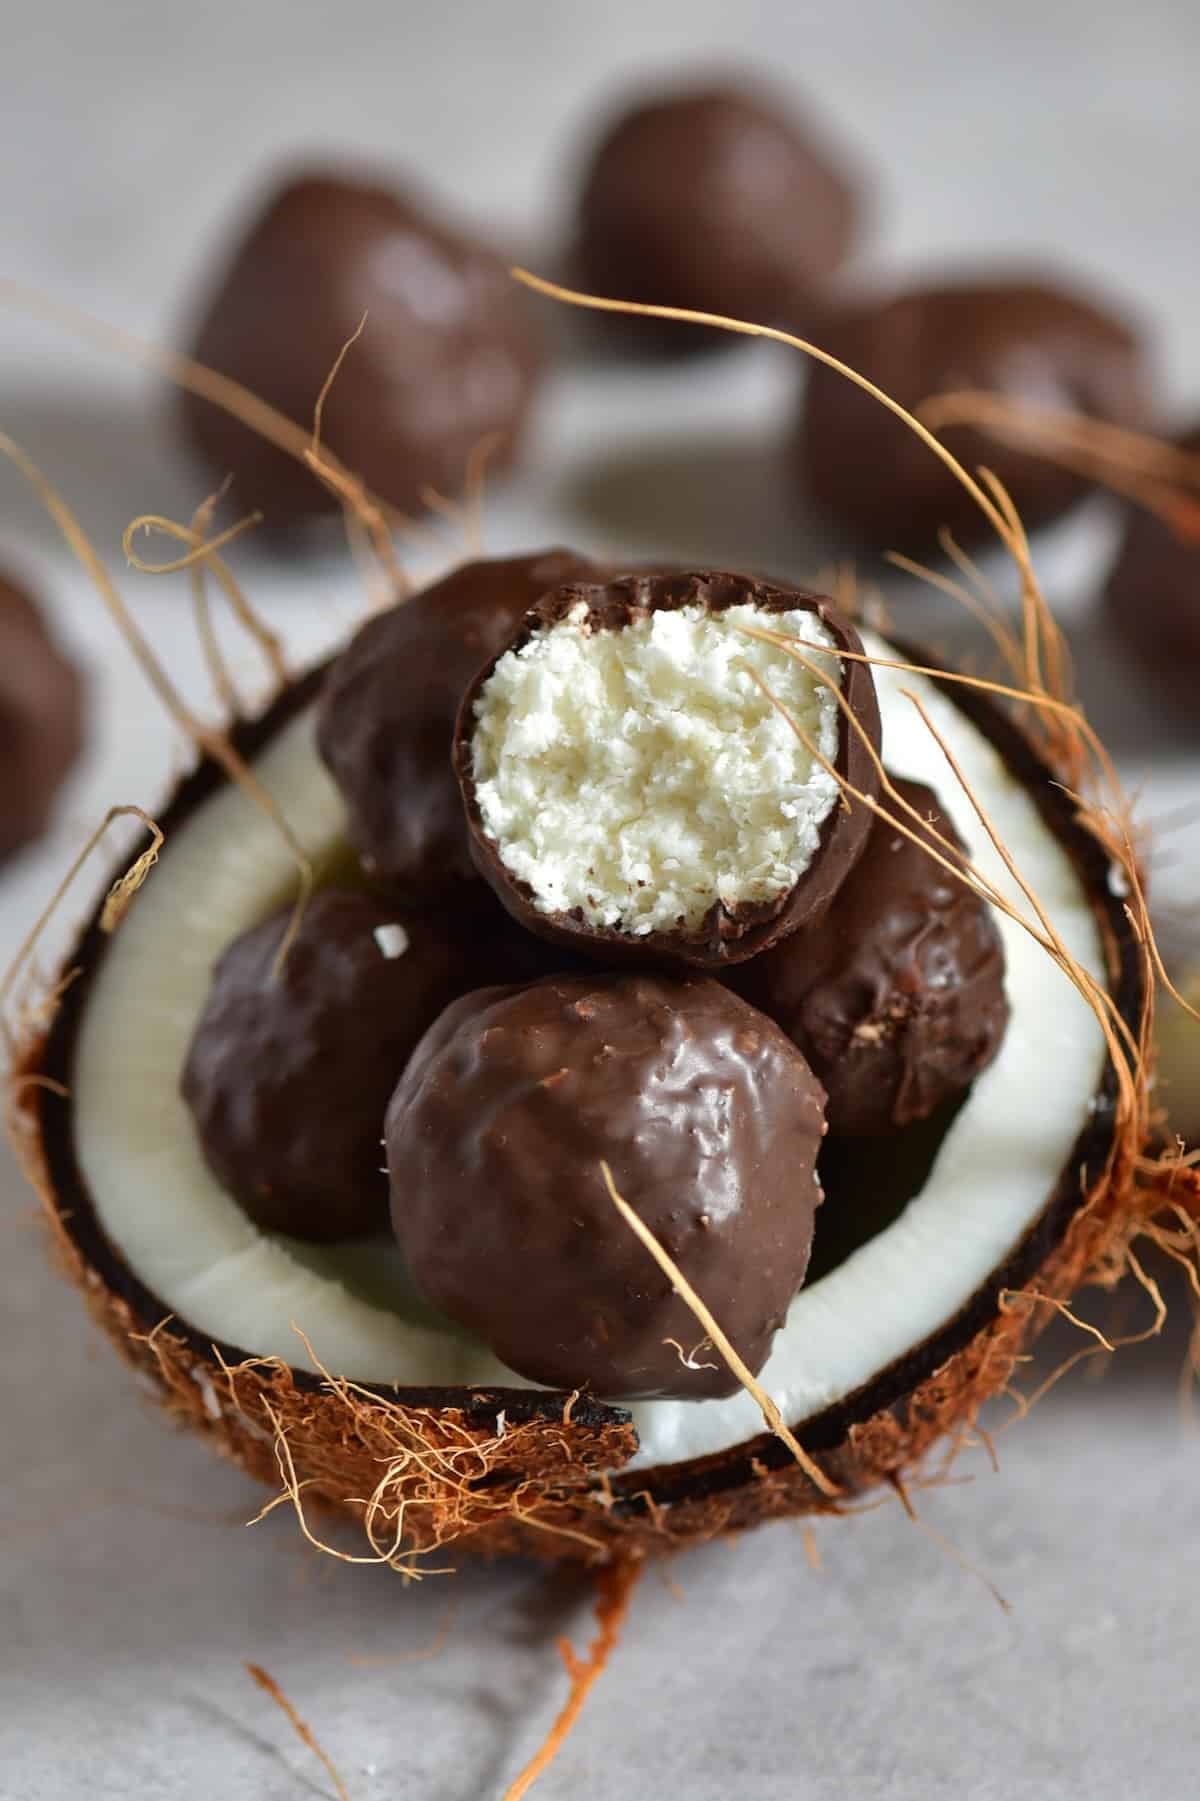 Chocolate coconut balls in an open coconut